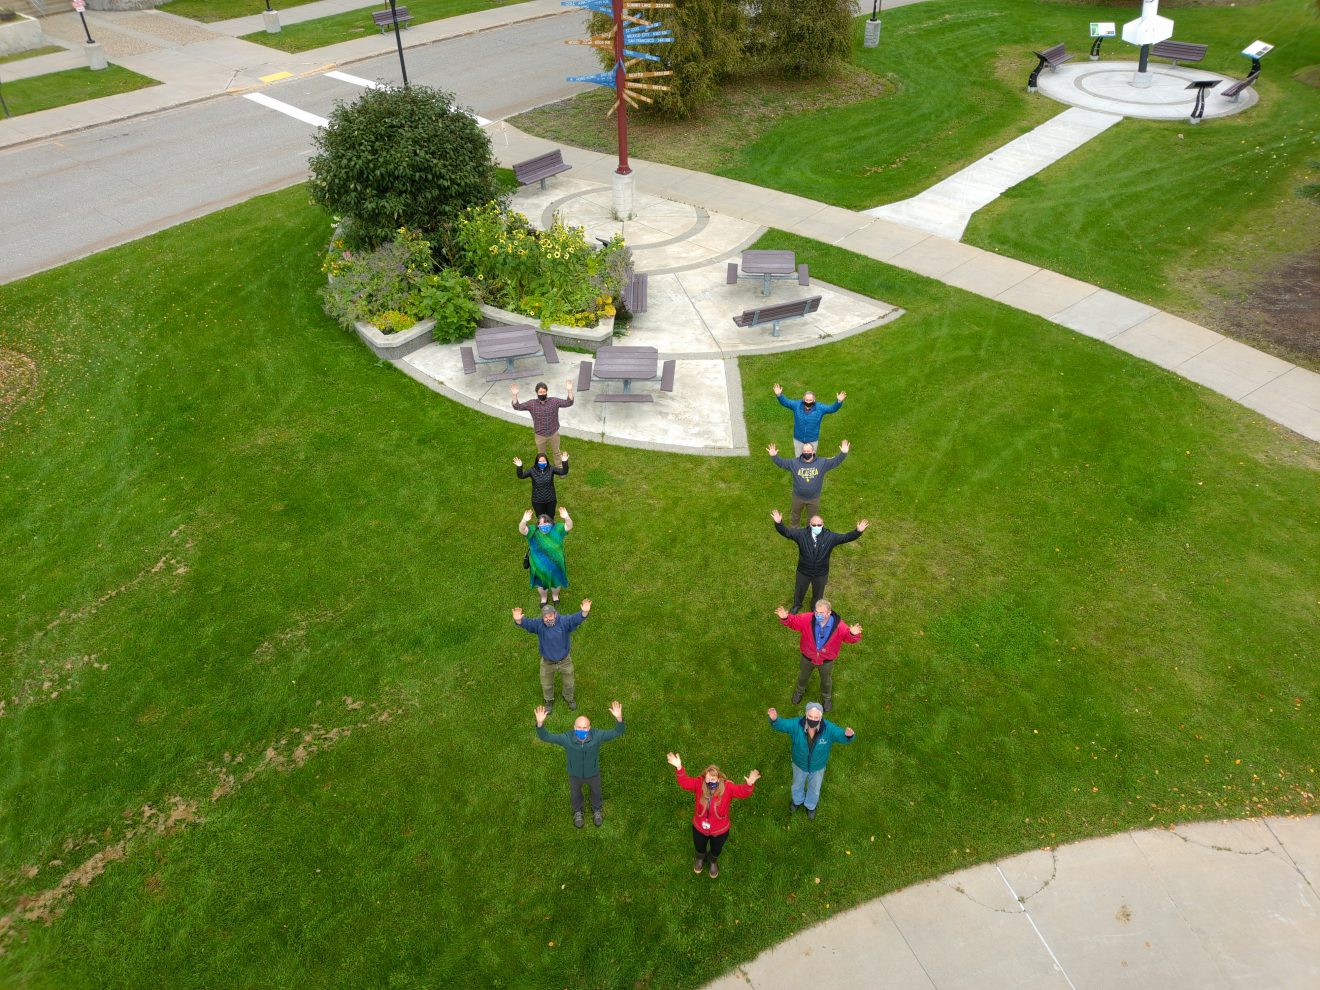 Aerial shot of a group of people standing on the grass. Their bodies form a giant "U," and their arms are also held up in a U shape.